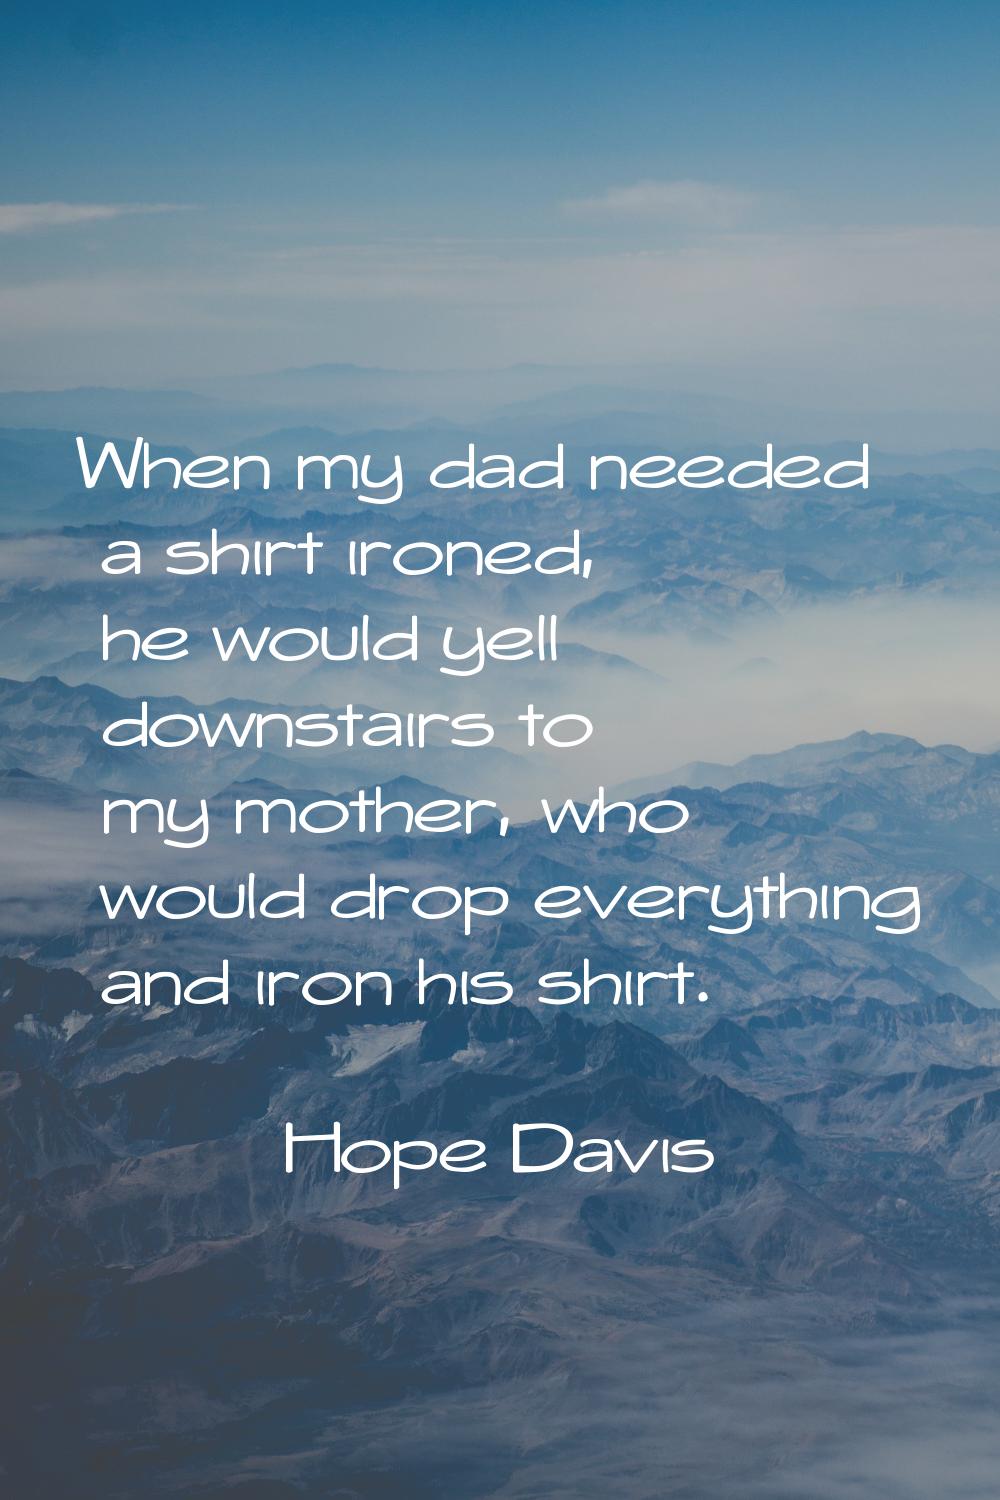 When my dad needed a shirt ironed, he would yell downstairs to my mother, who would drop everything